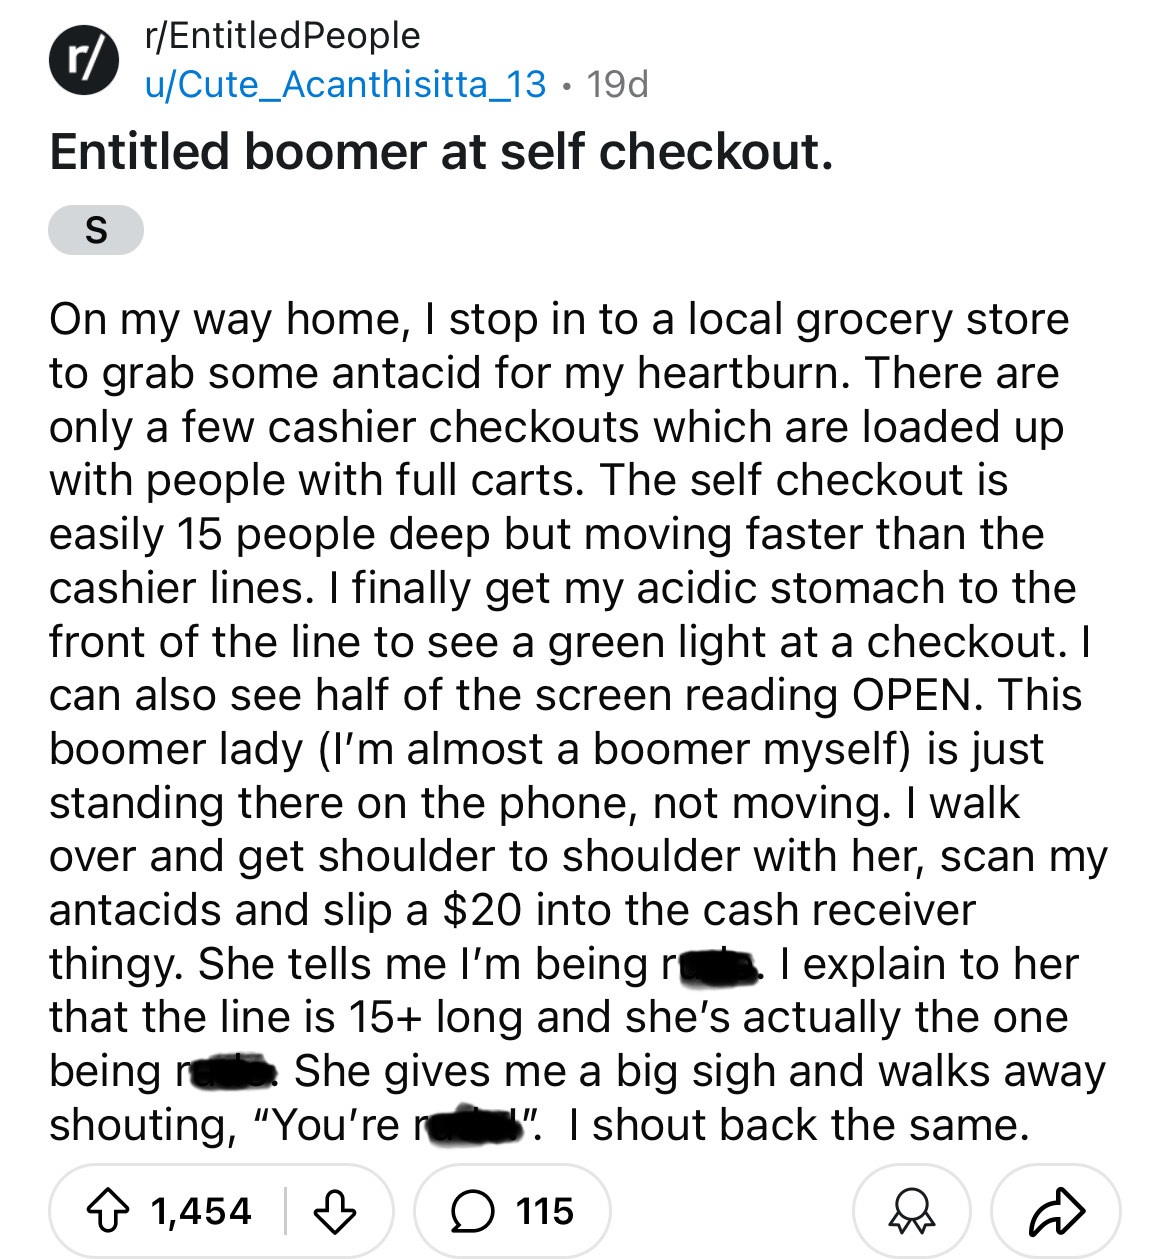 number - r rEntitled People uCute_Acanthisitta_13 19d . Entitled boomer at self checkout. S On my way home, I stop in to a local grocery store to grab some antacid for my heartburn. There are only a few cashier checkouts which are loaded up with people wi